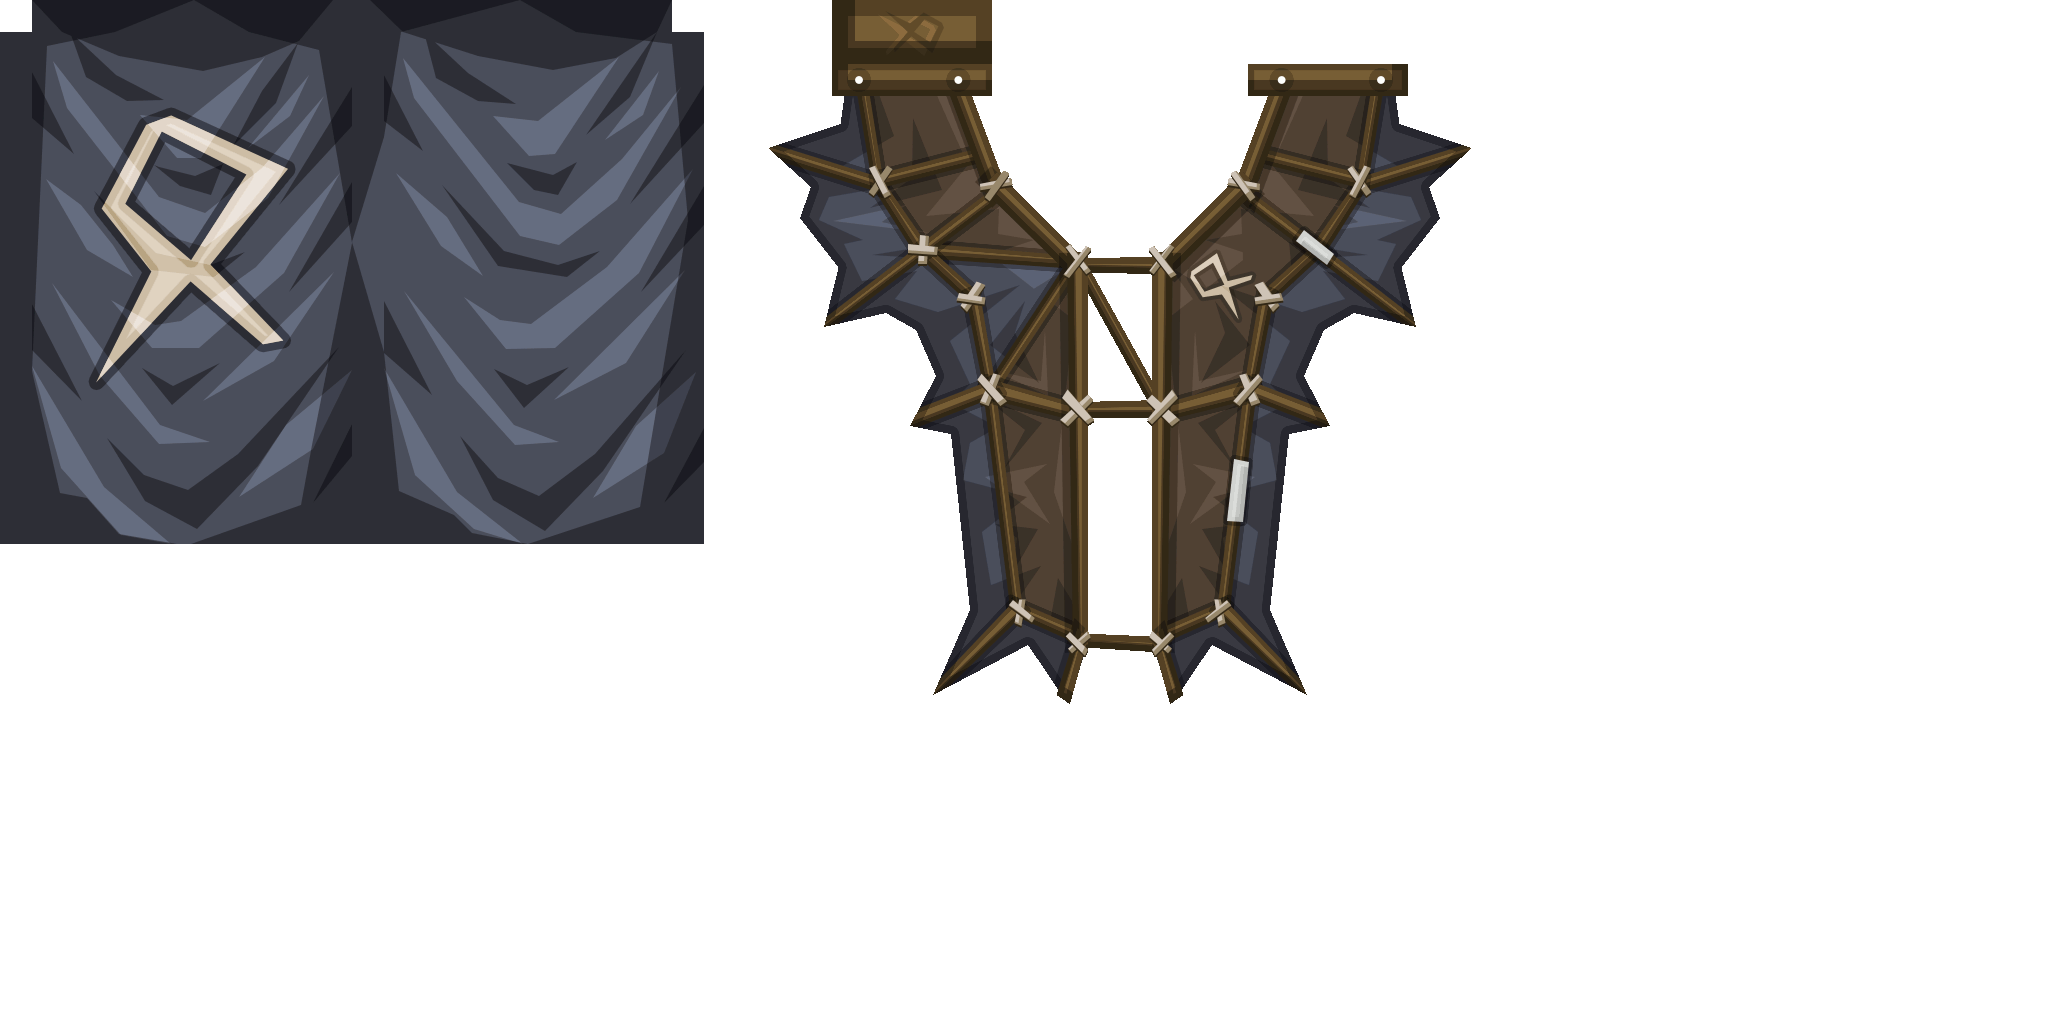 More information about "hd cape"